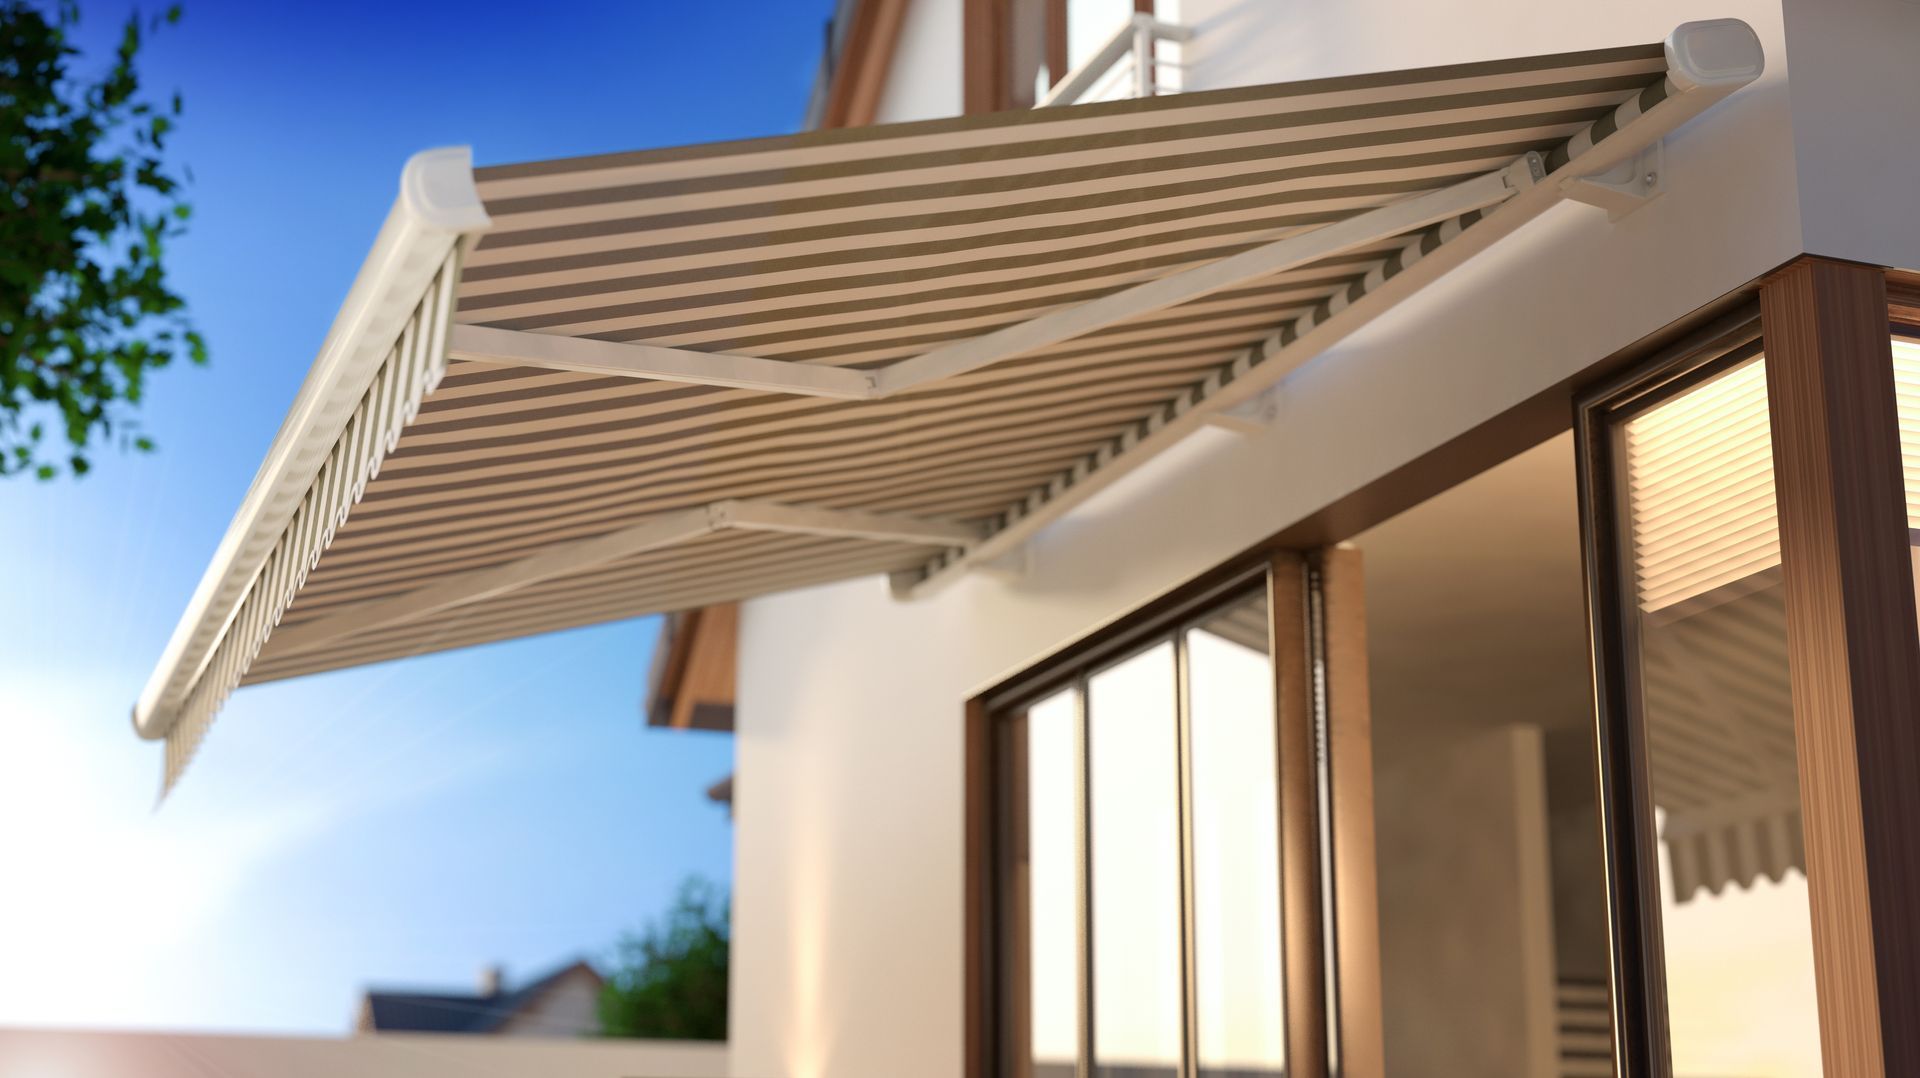 Common issues with retractable awning